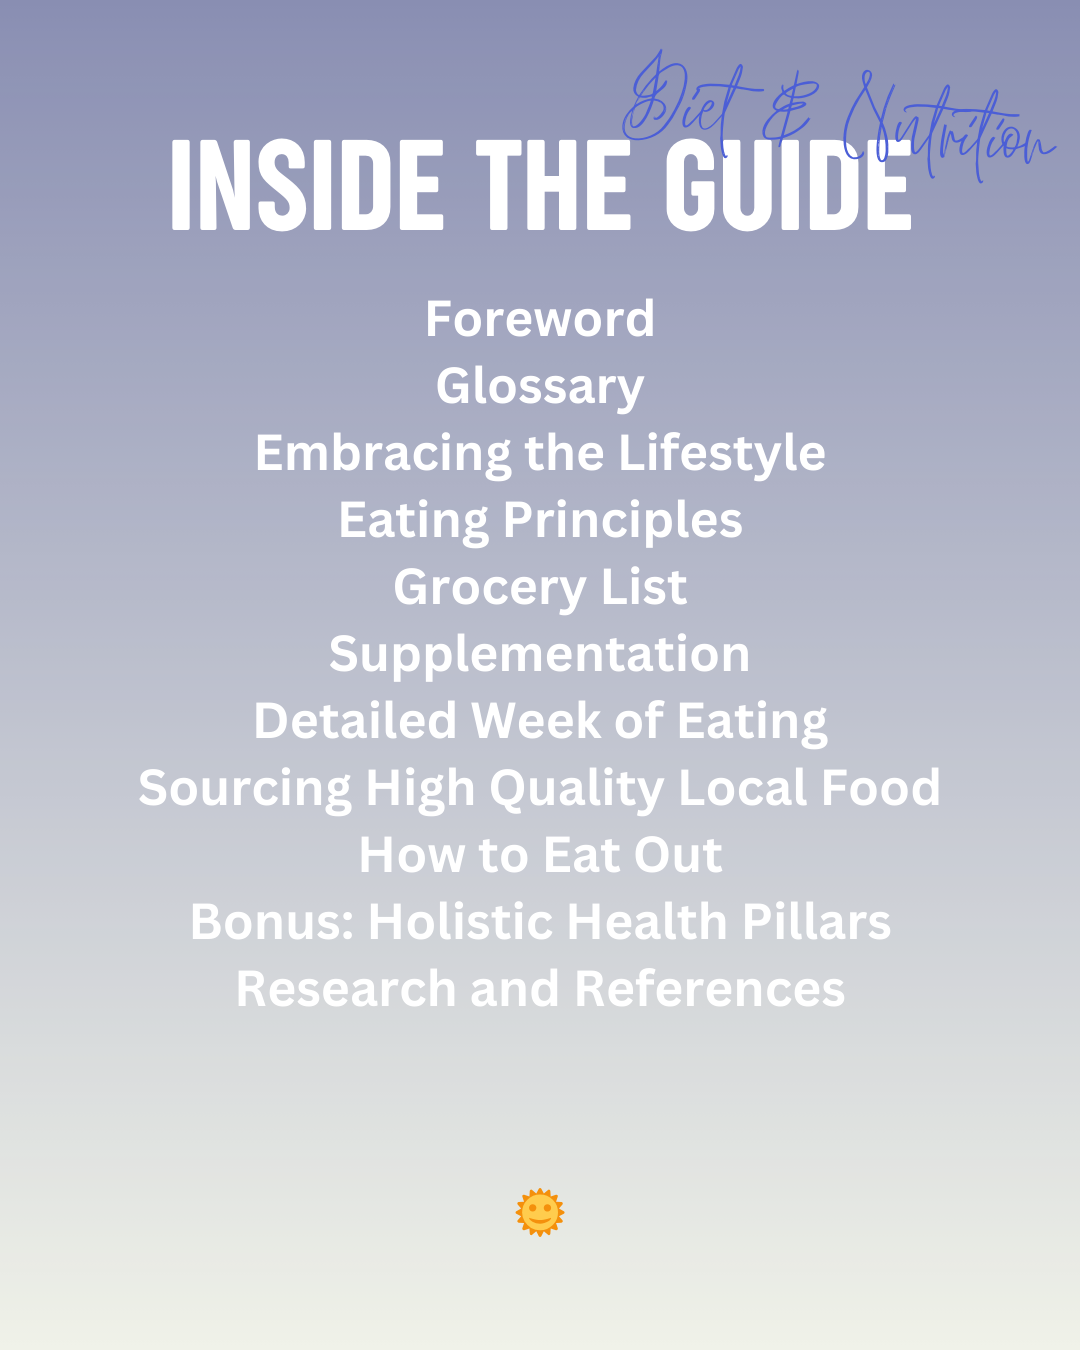 Purebody Eats: Diet & Nutrition Guide